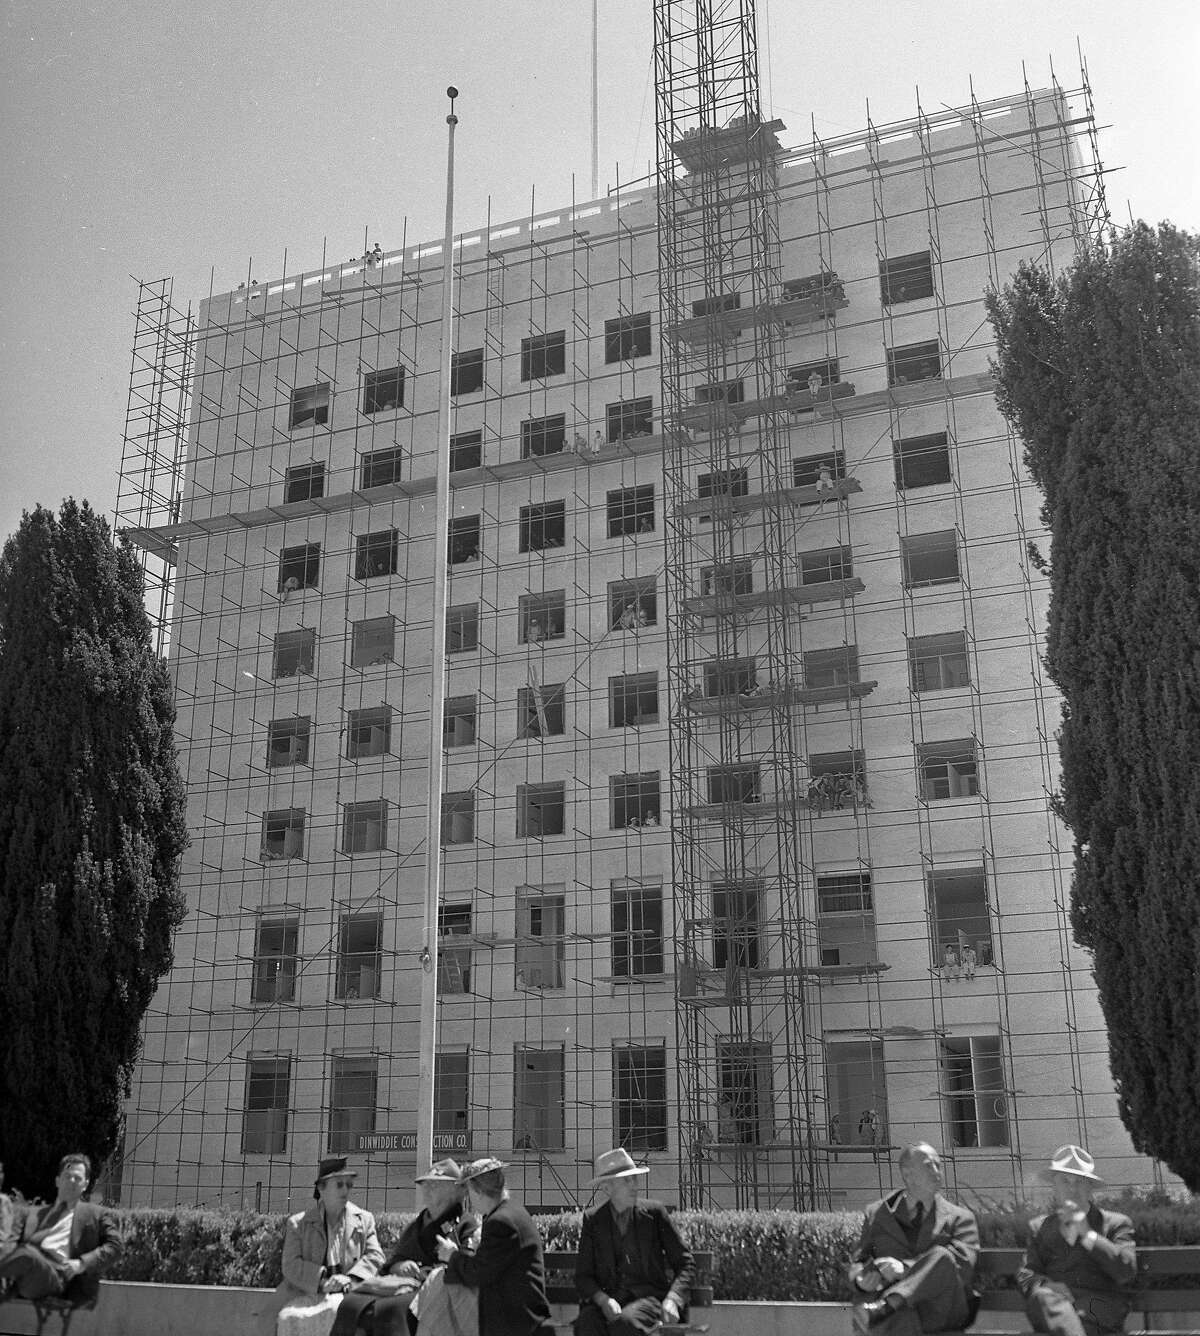 The new I. Magnin building on Union Square, under construction late 1947